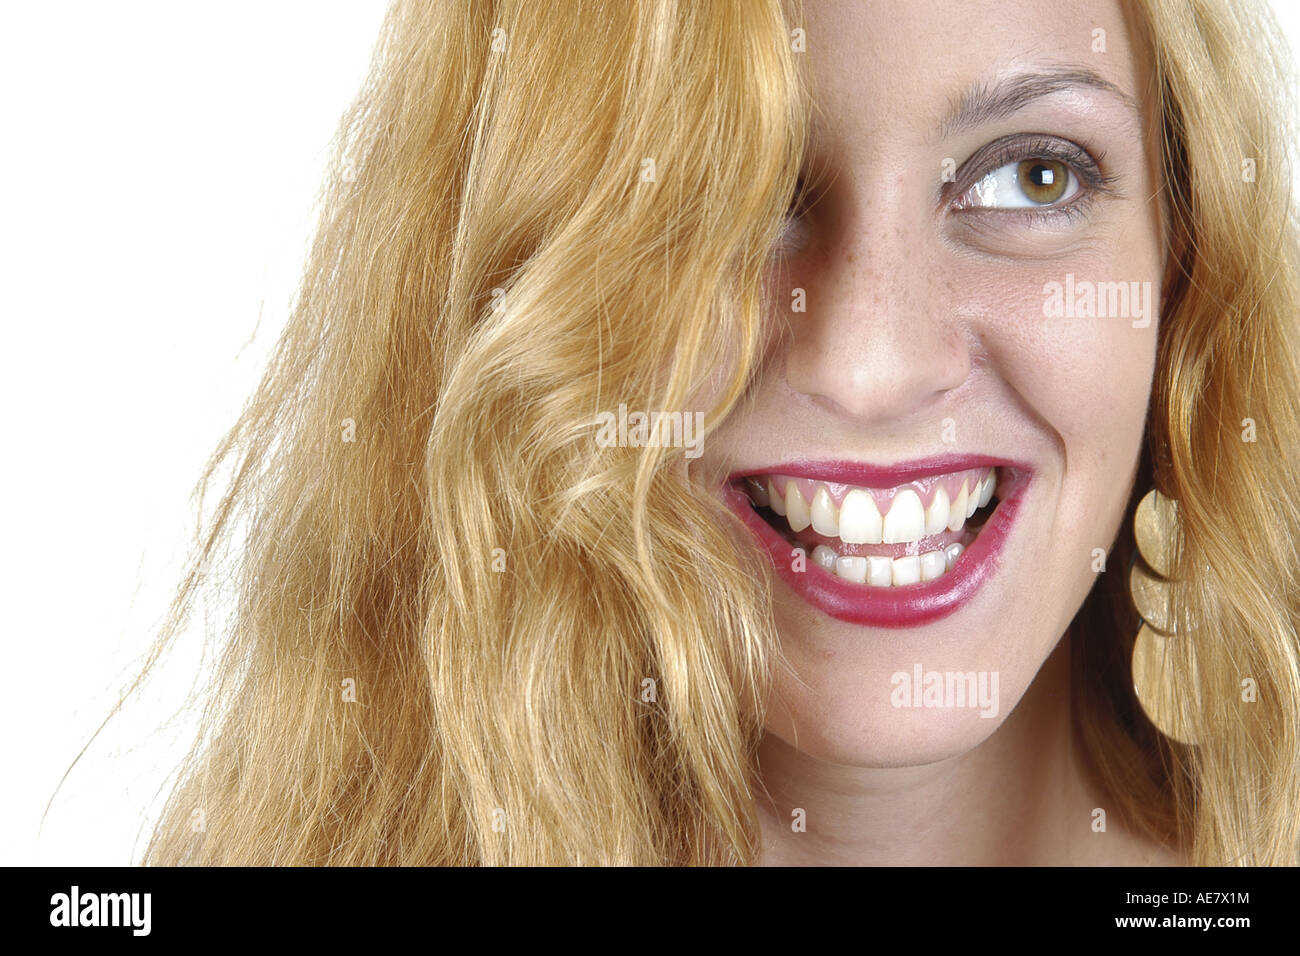 portrait of a laughing young women, Germany Stock Photo